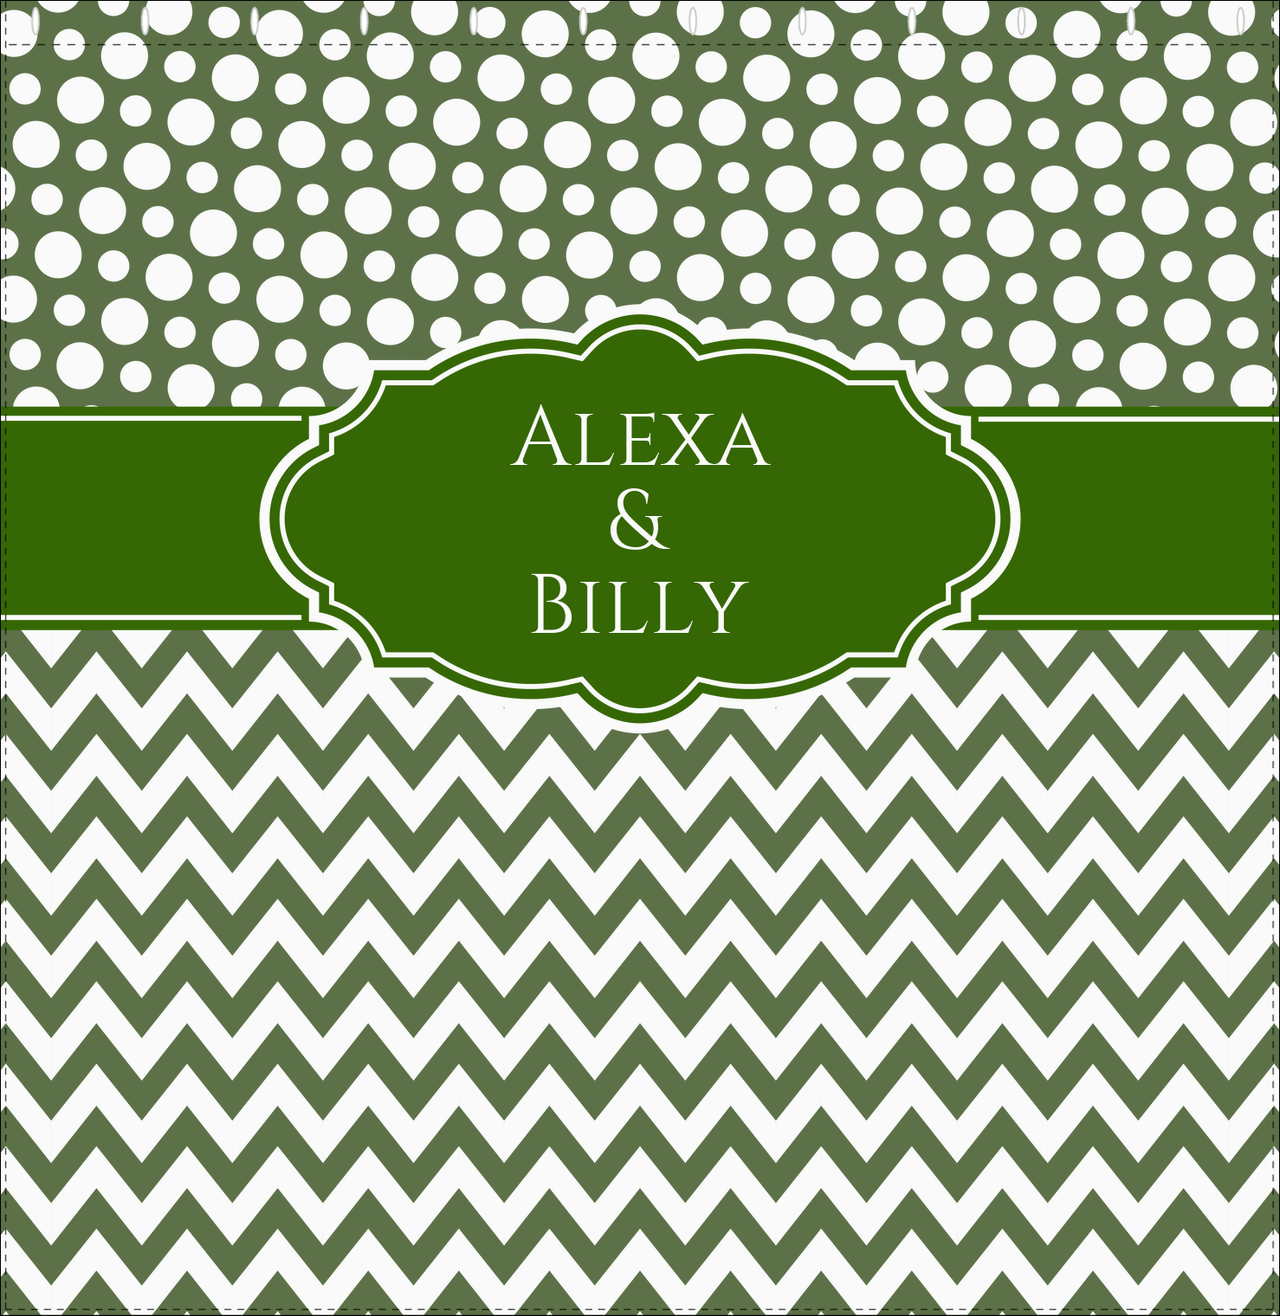 Personalized Polka Dots and Chevron III Shower Curtain - Green and White - Fancy Nameplate II - Decorate View